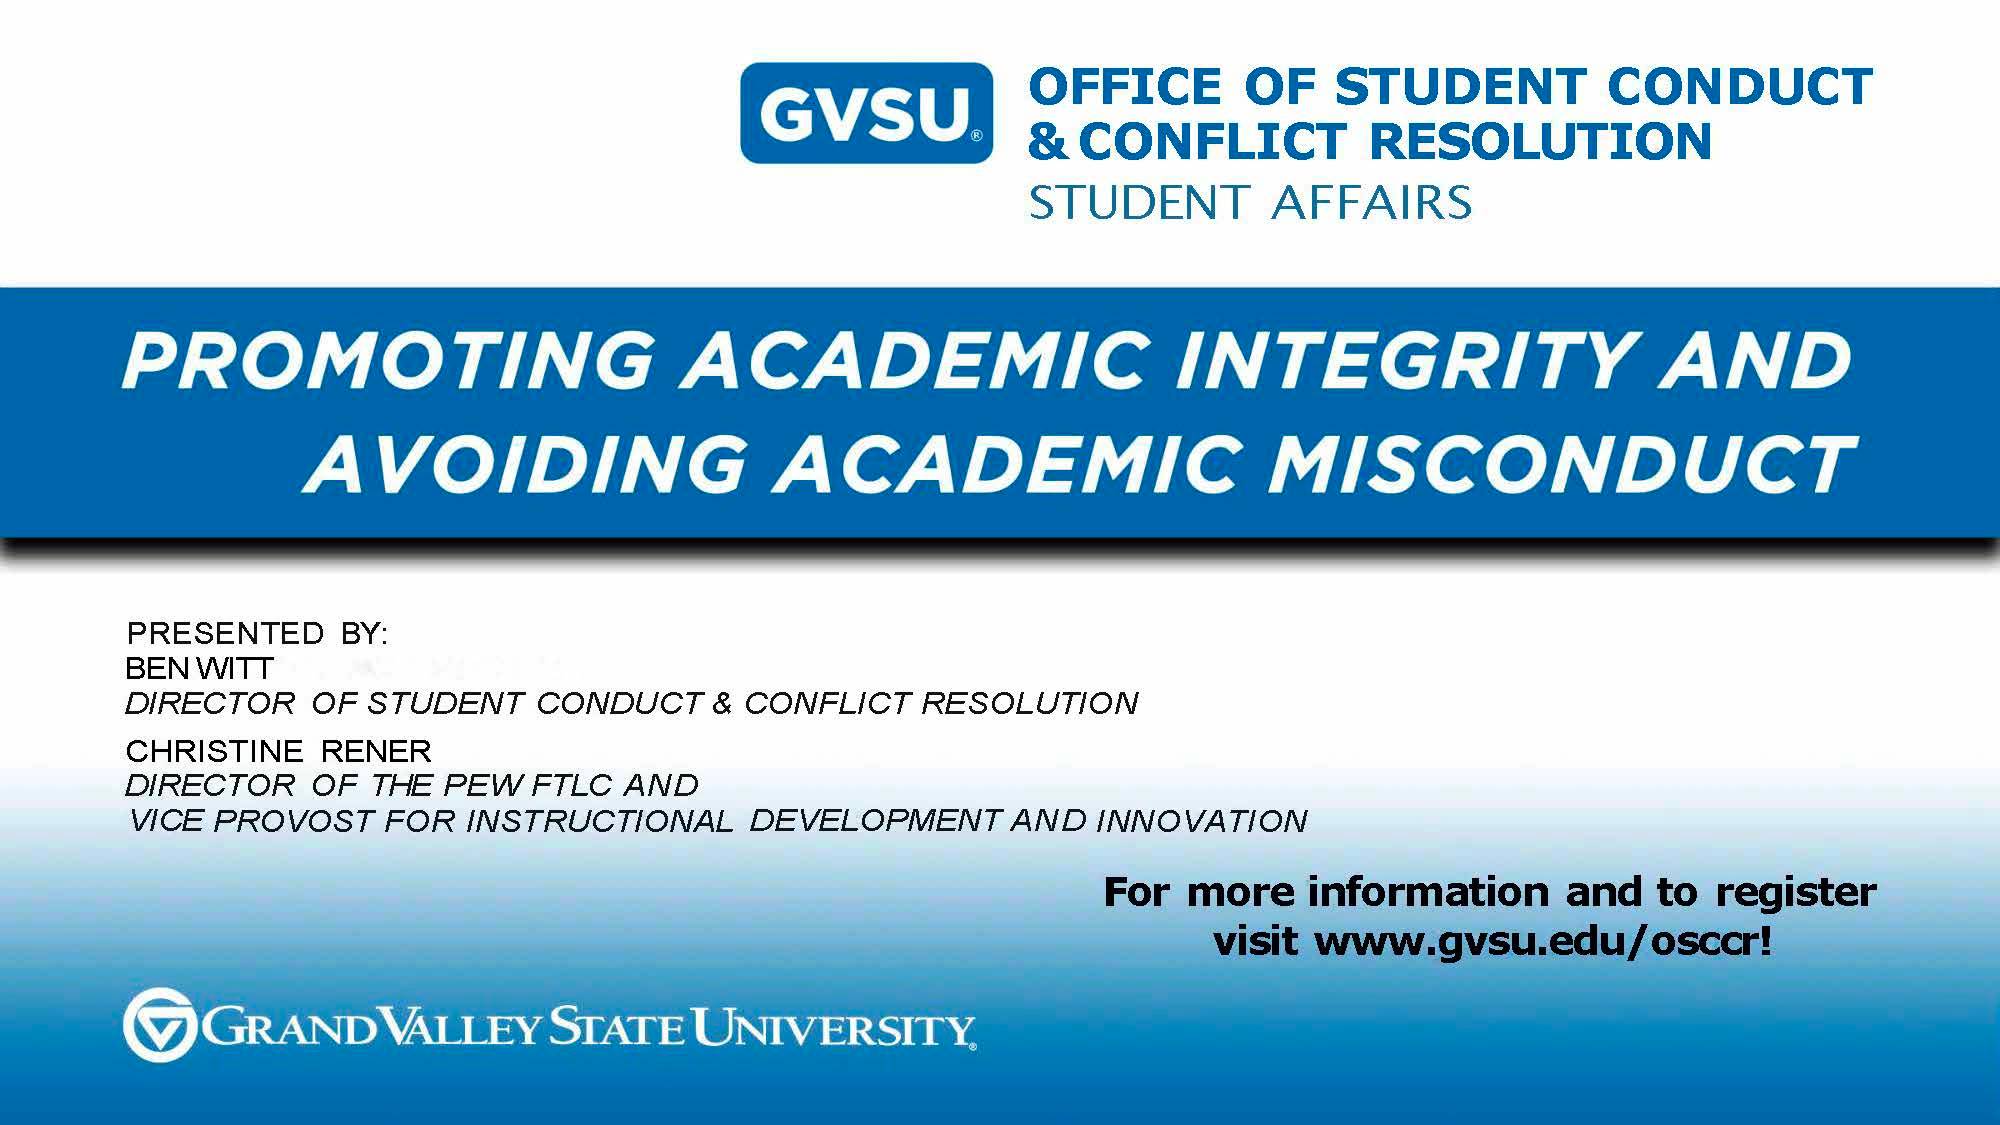 Promoting Academic Integrity and Avoiding Academic Misconduct Workshop